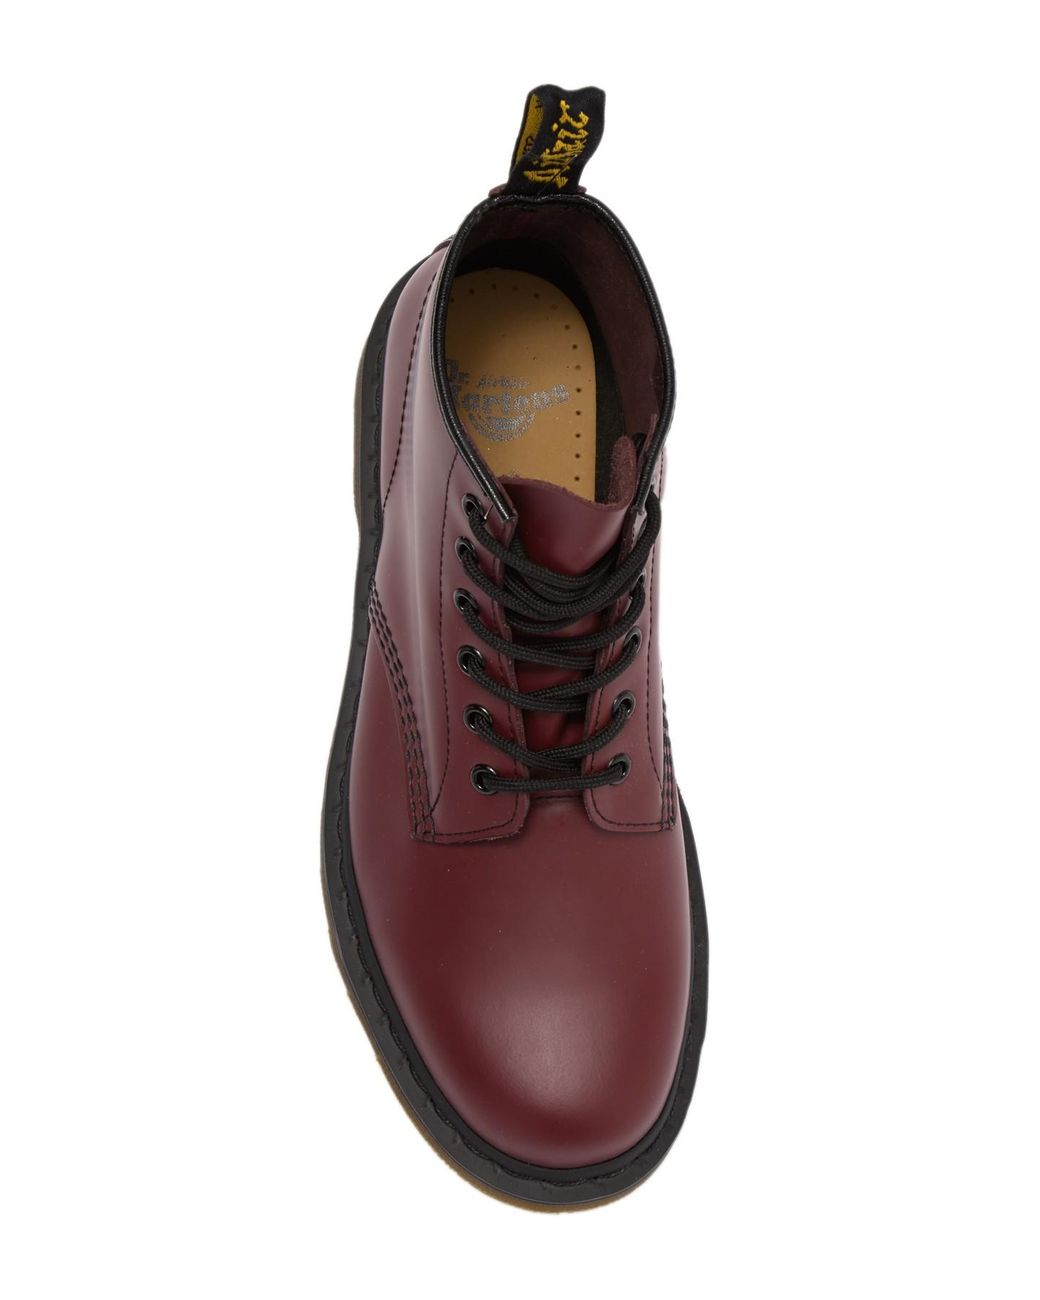 Dr. Martens 6-eye Cherry Leather Boot in Cherry Red (Red) for Men | Lyst